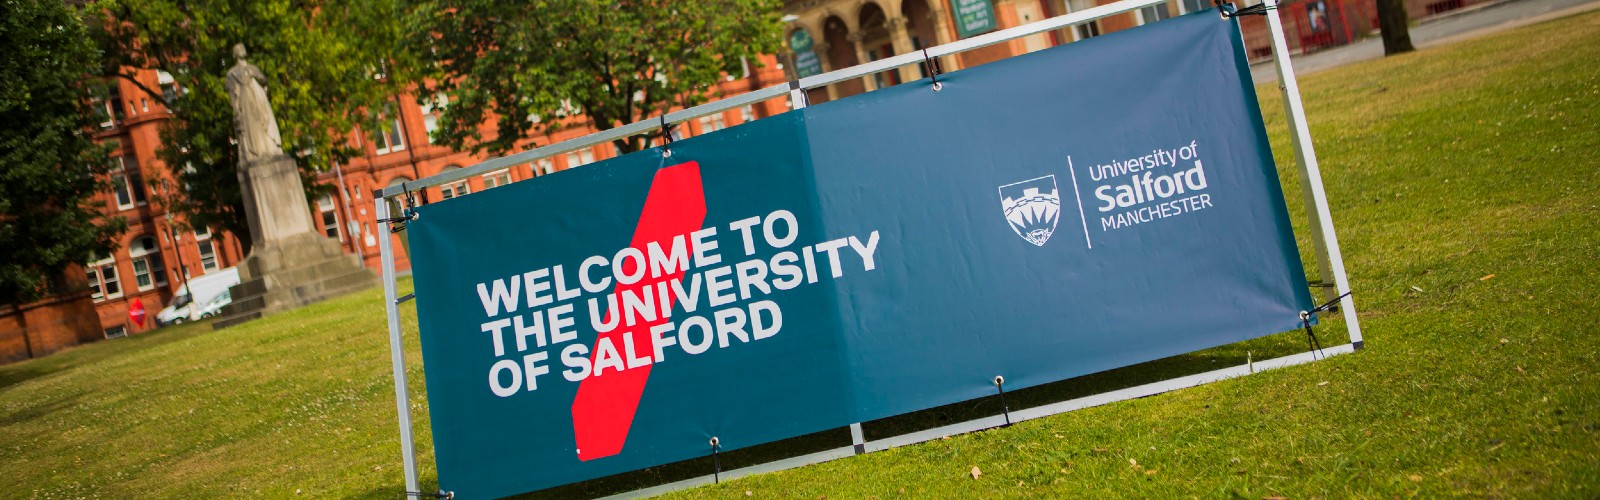 A sign outside of Campus saying "Welcome to the University of Salford."